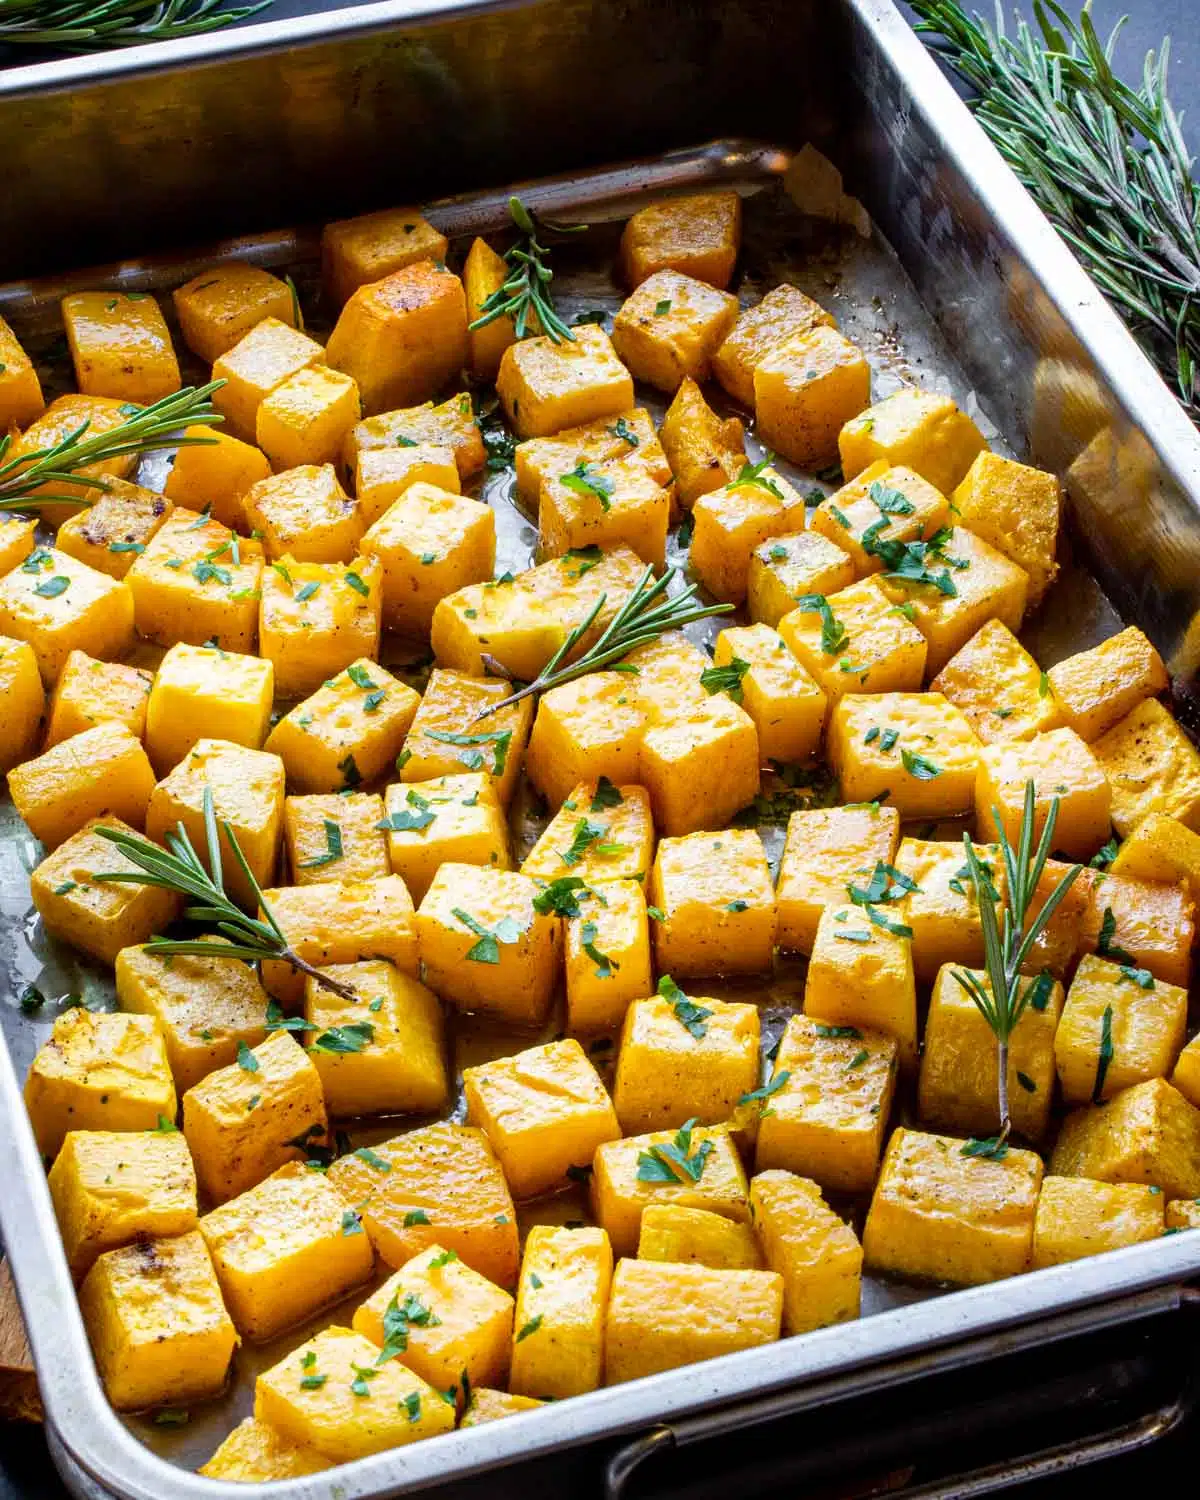 roasted butternut squash garnished in with rosemary and parsley in a pan.